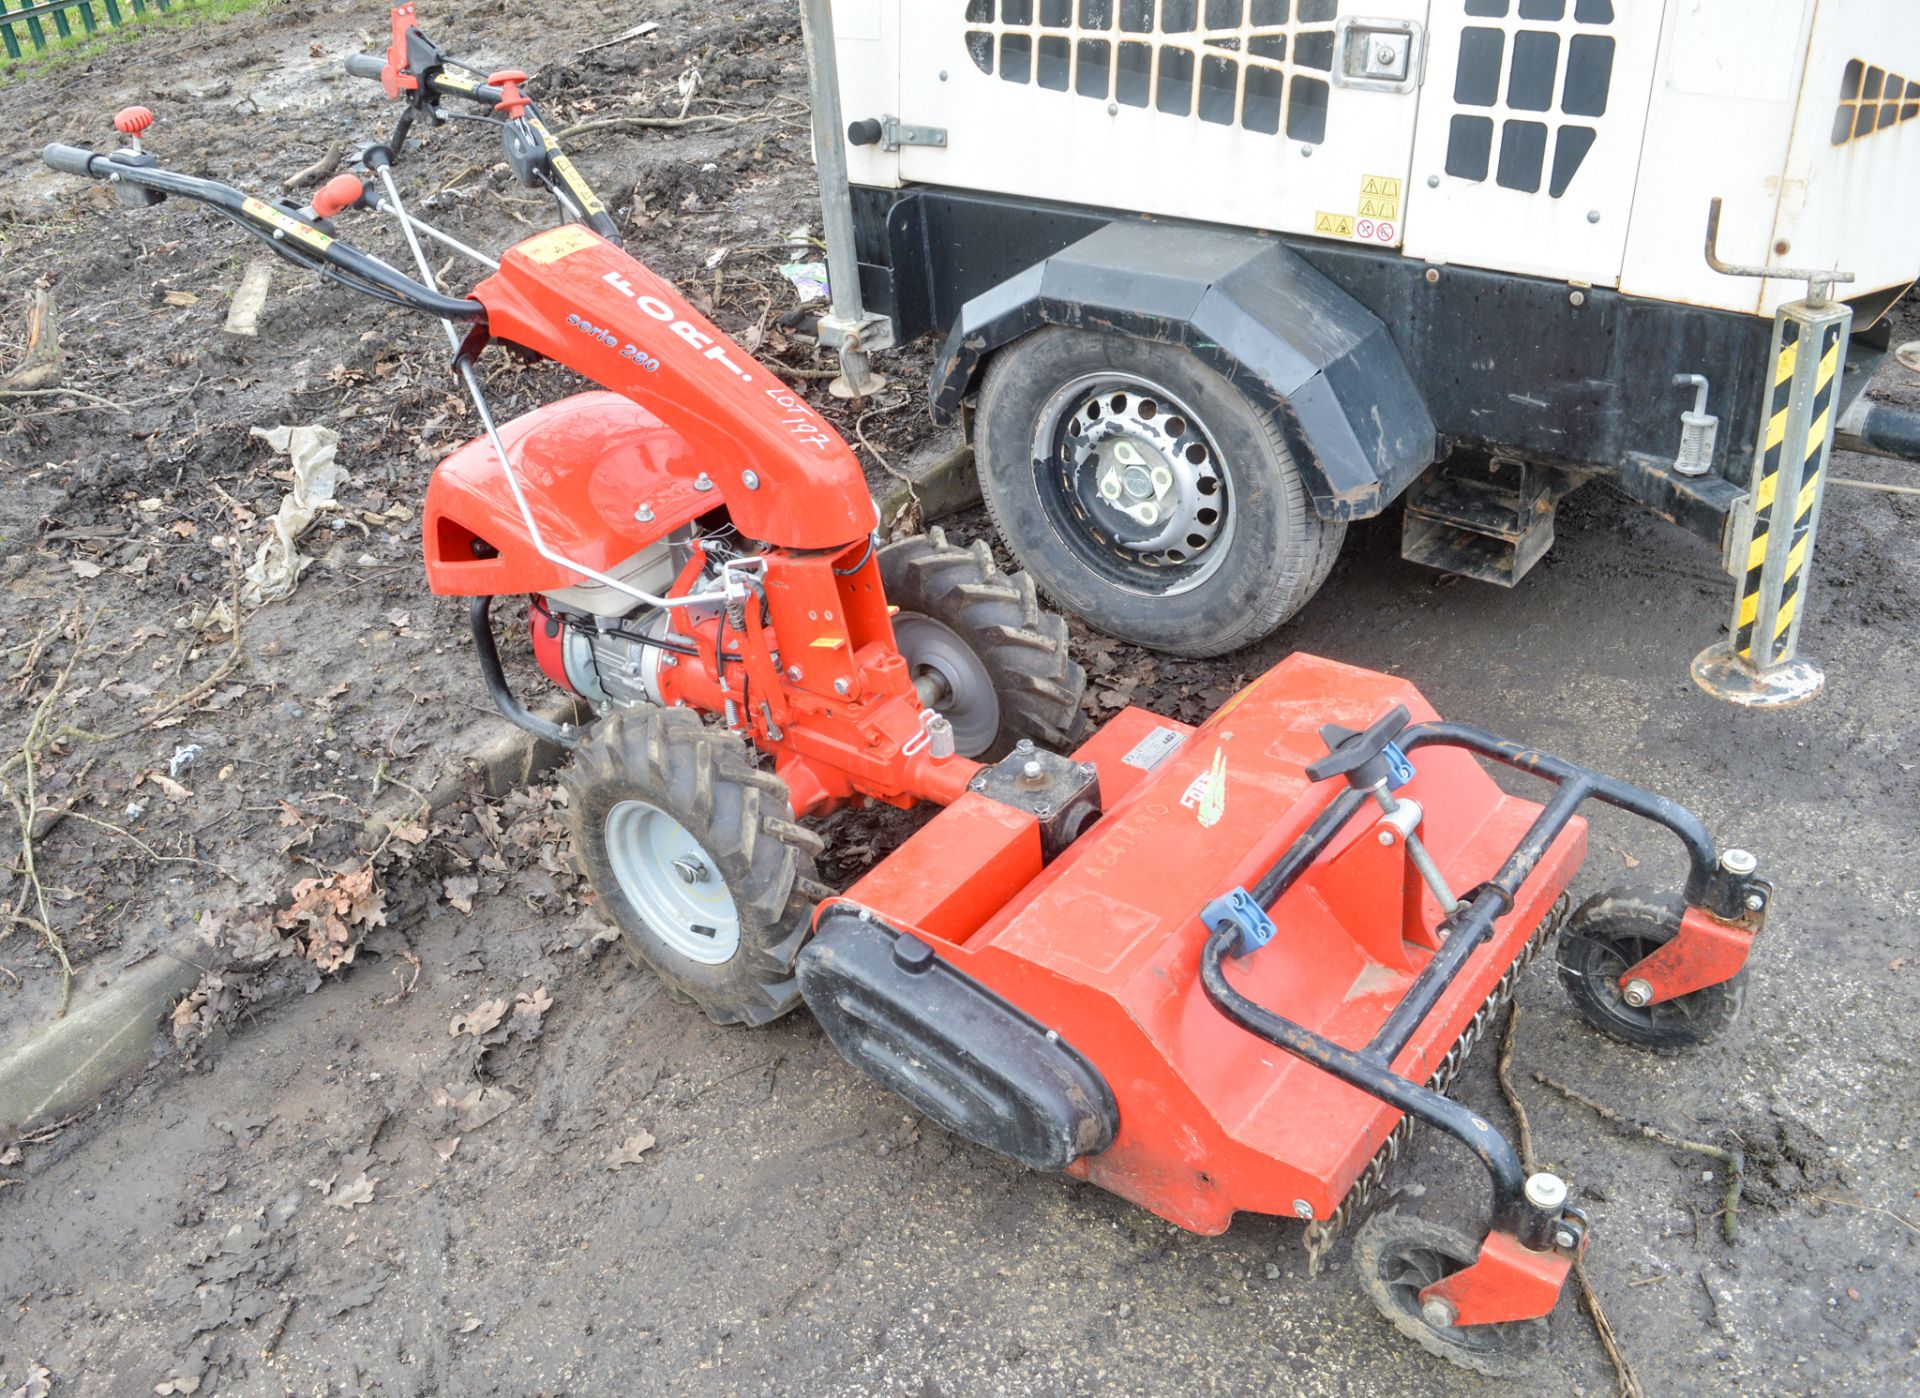 Fort Serie 280 petrol driven flail mower A641490